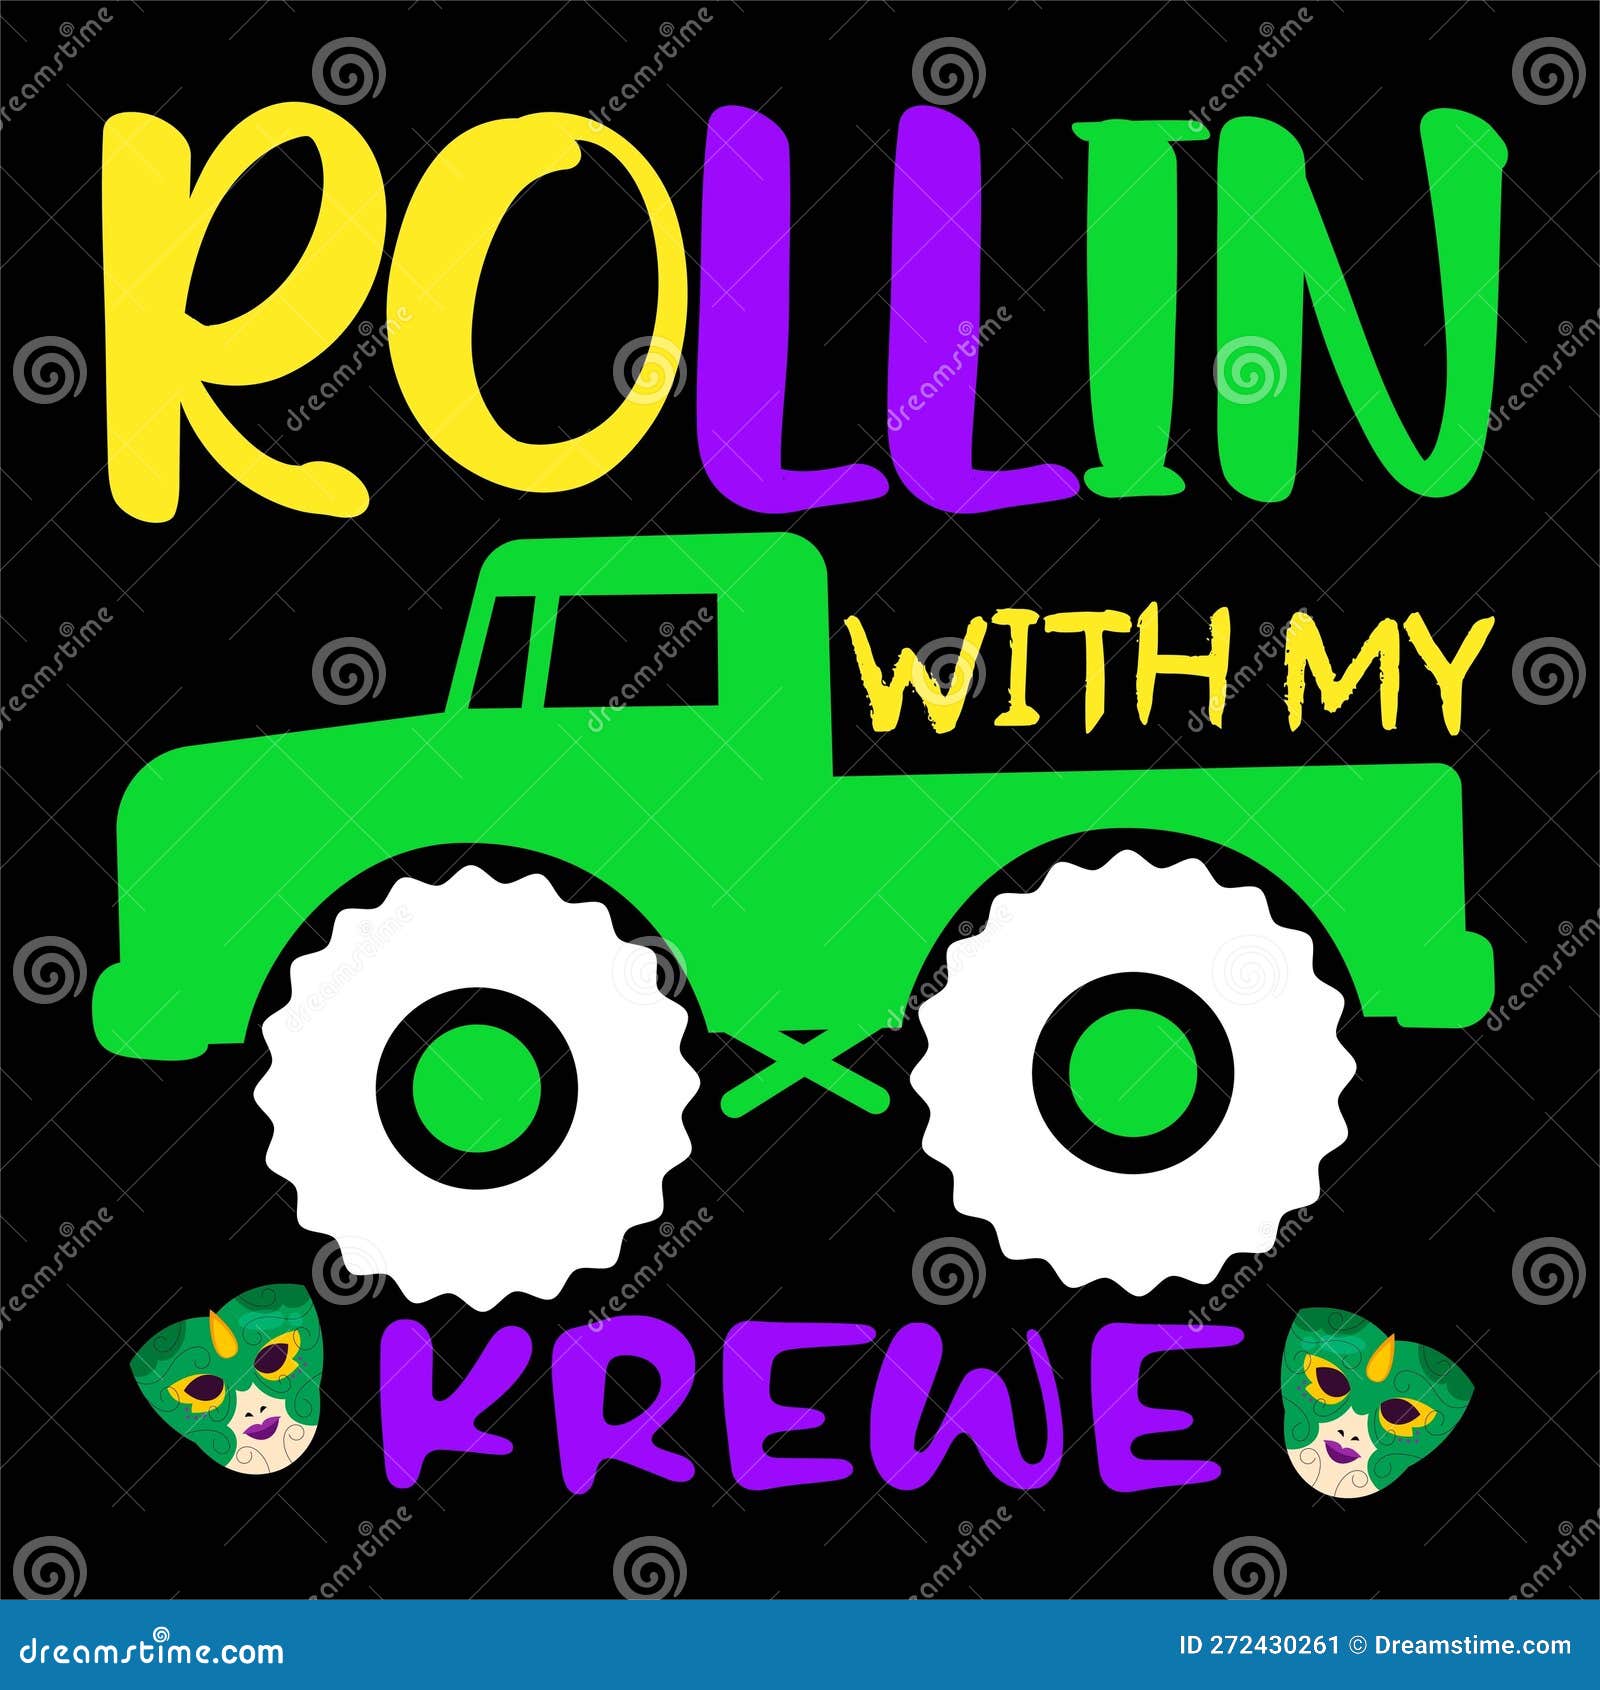 rollin with my krewe, typography  for carnival celebration